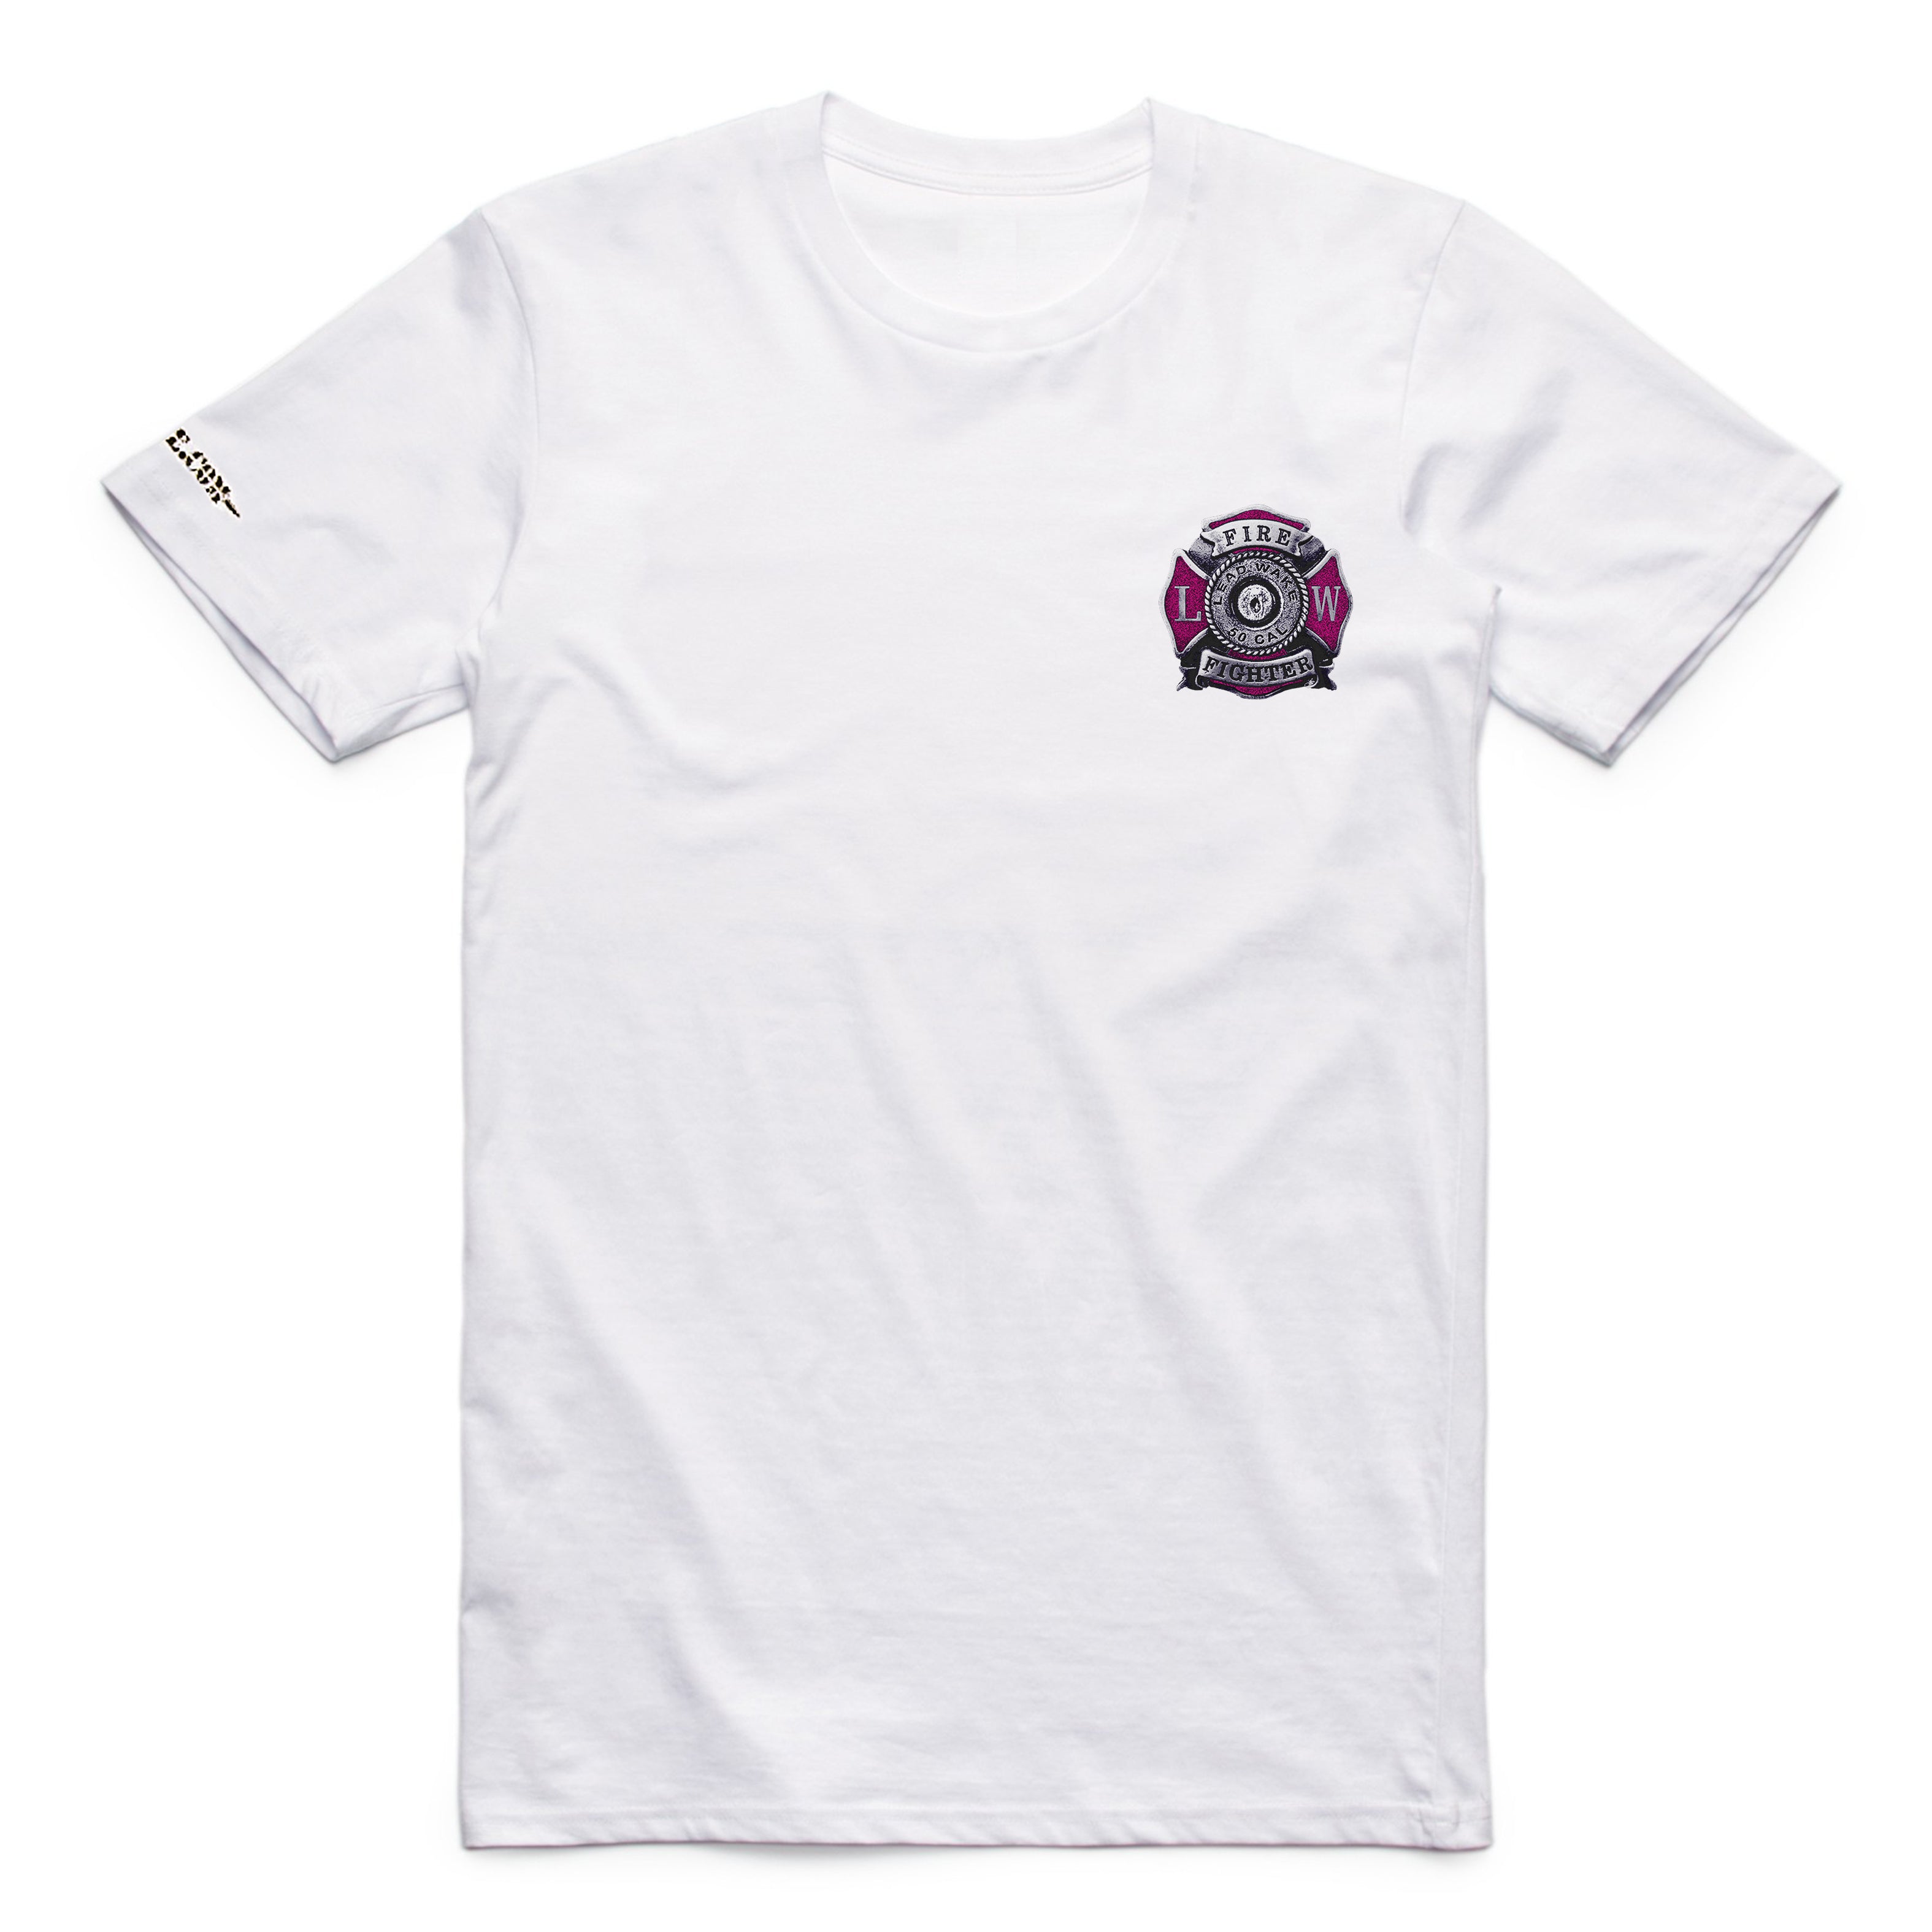 Men's Breast Cancer Awareness<br> T-Shirt in White